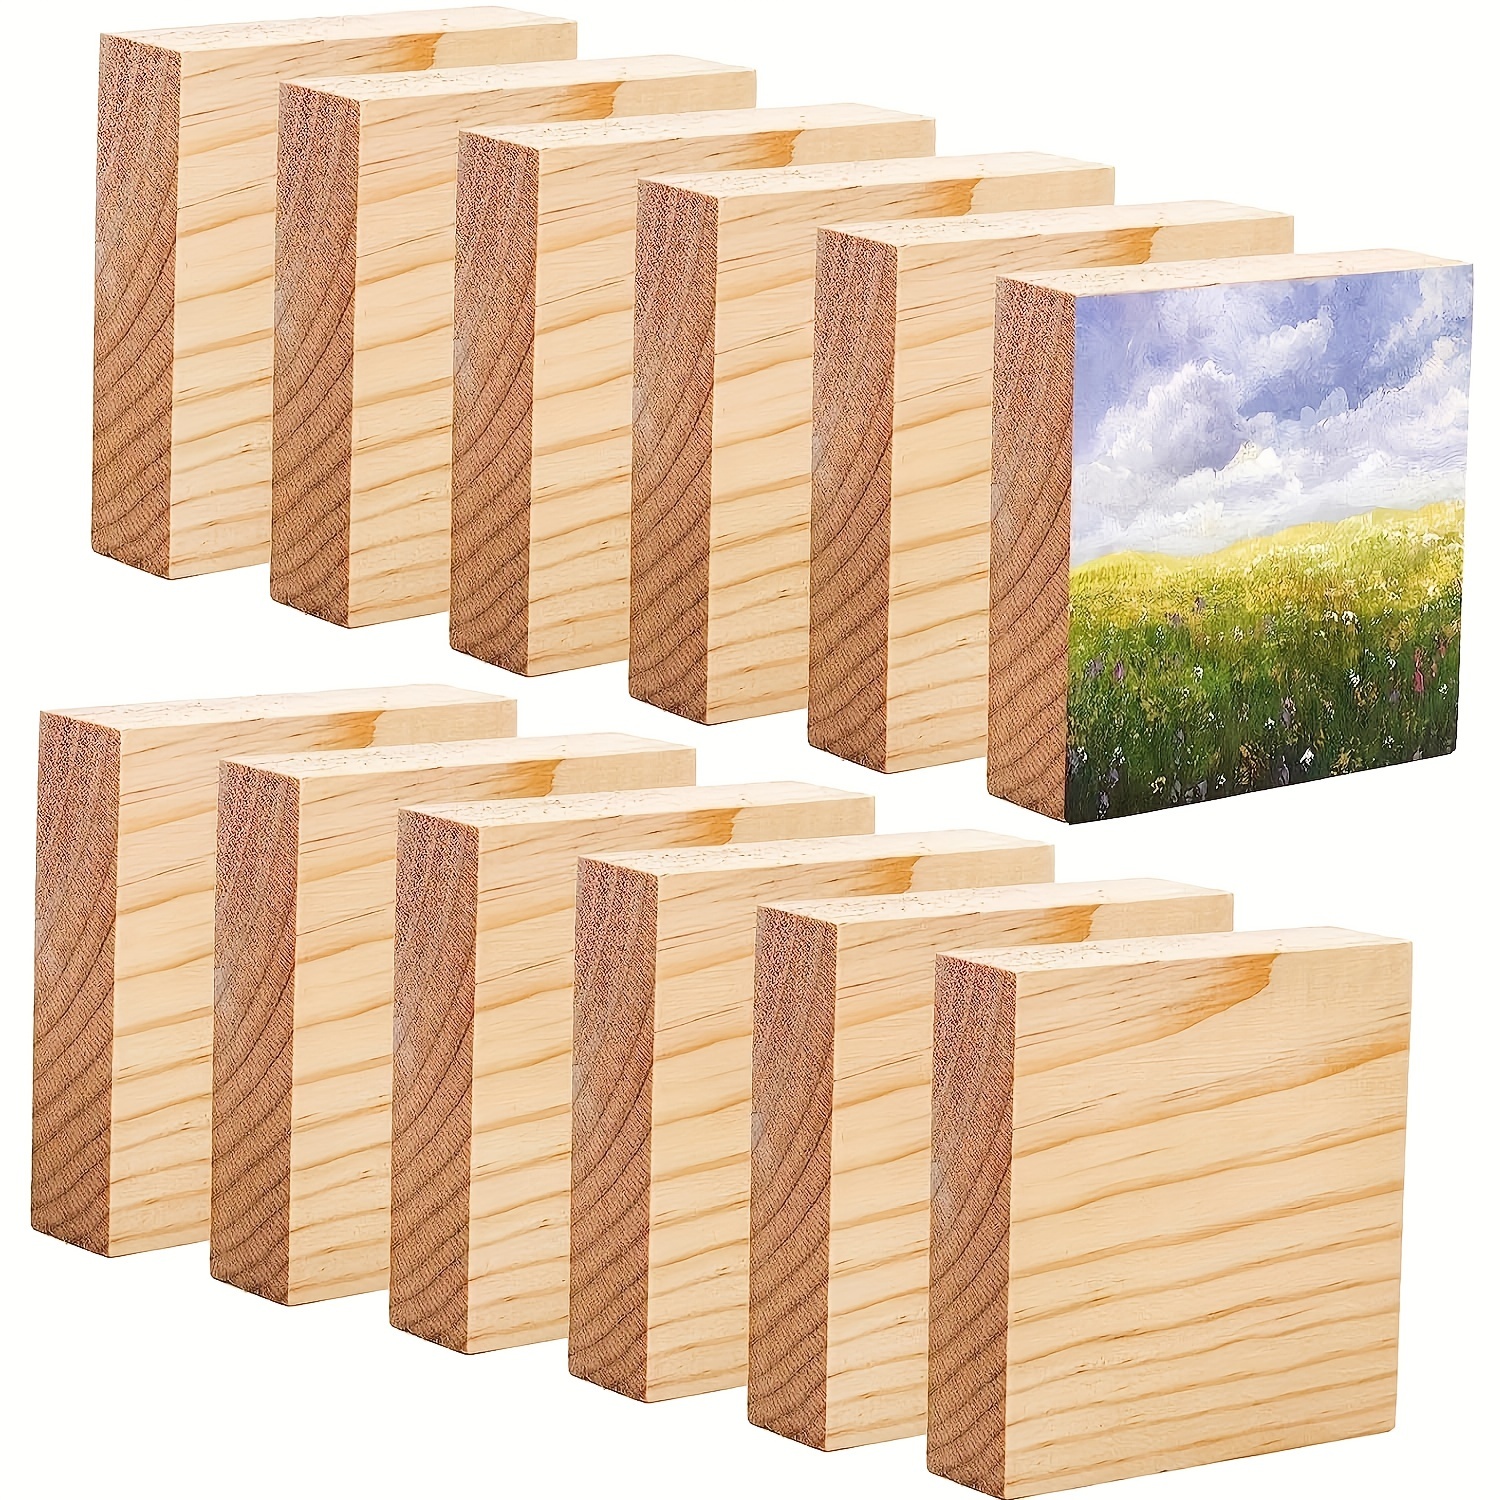 Wood Tiles, 2 x 2 Inch, Pack of 50 Blank Wood Squares for Crafts, Wood  Burning, Laser Engraving, and DIY, by Woodpeckers 